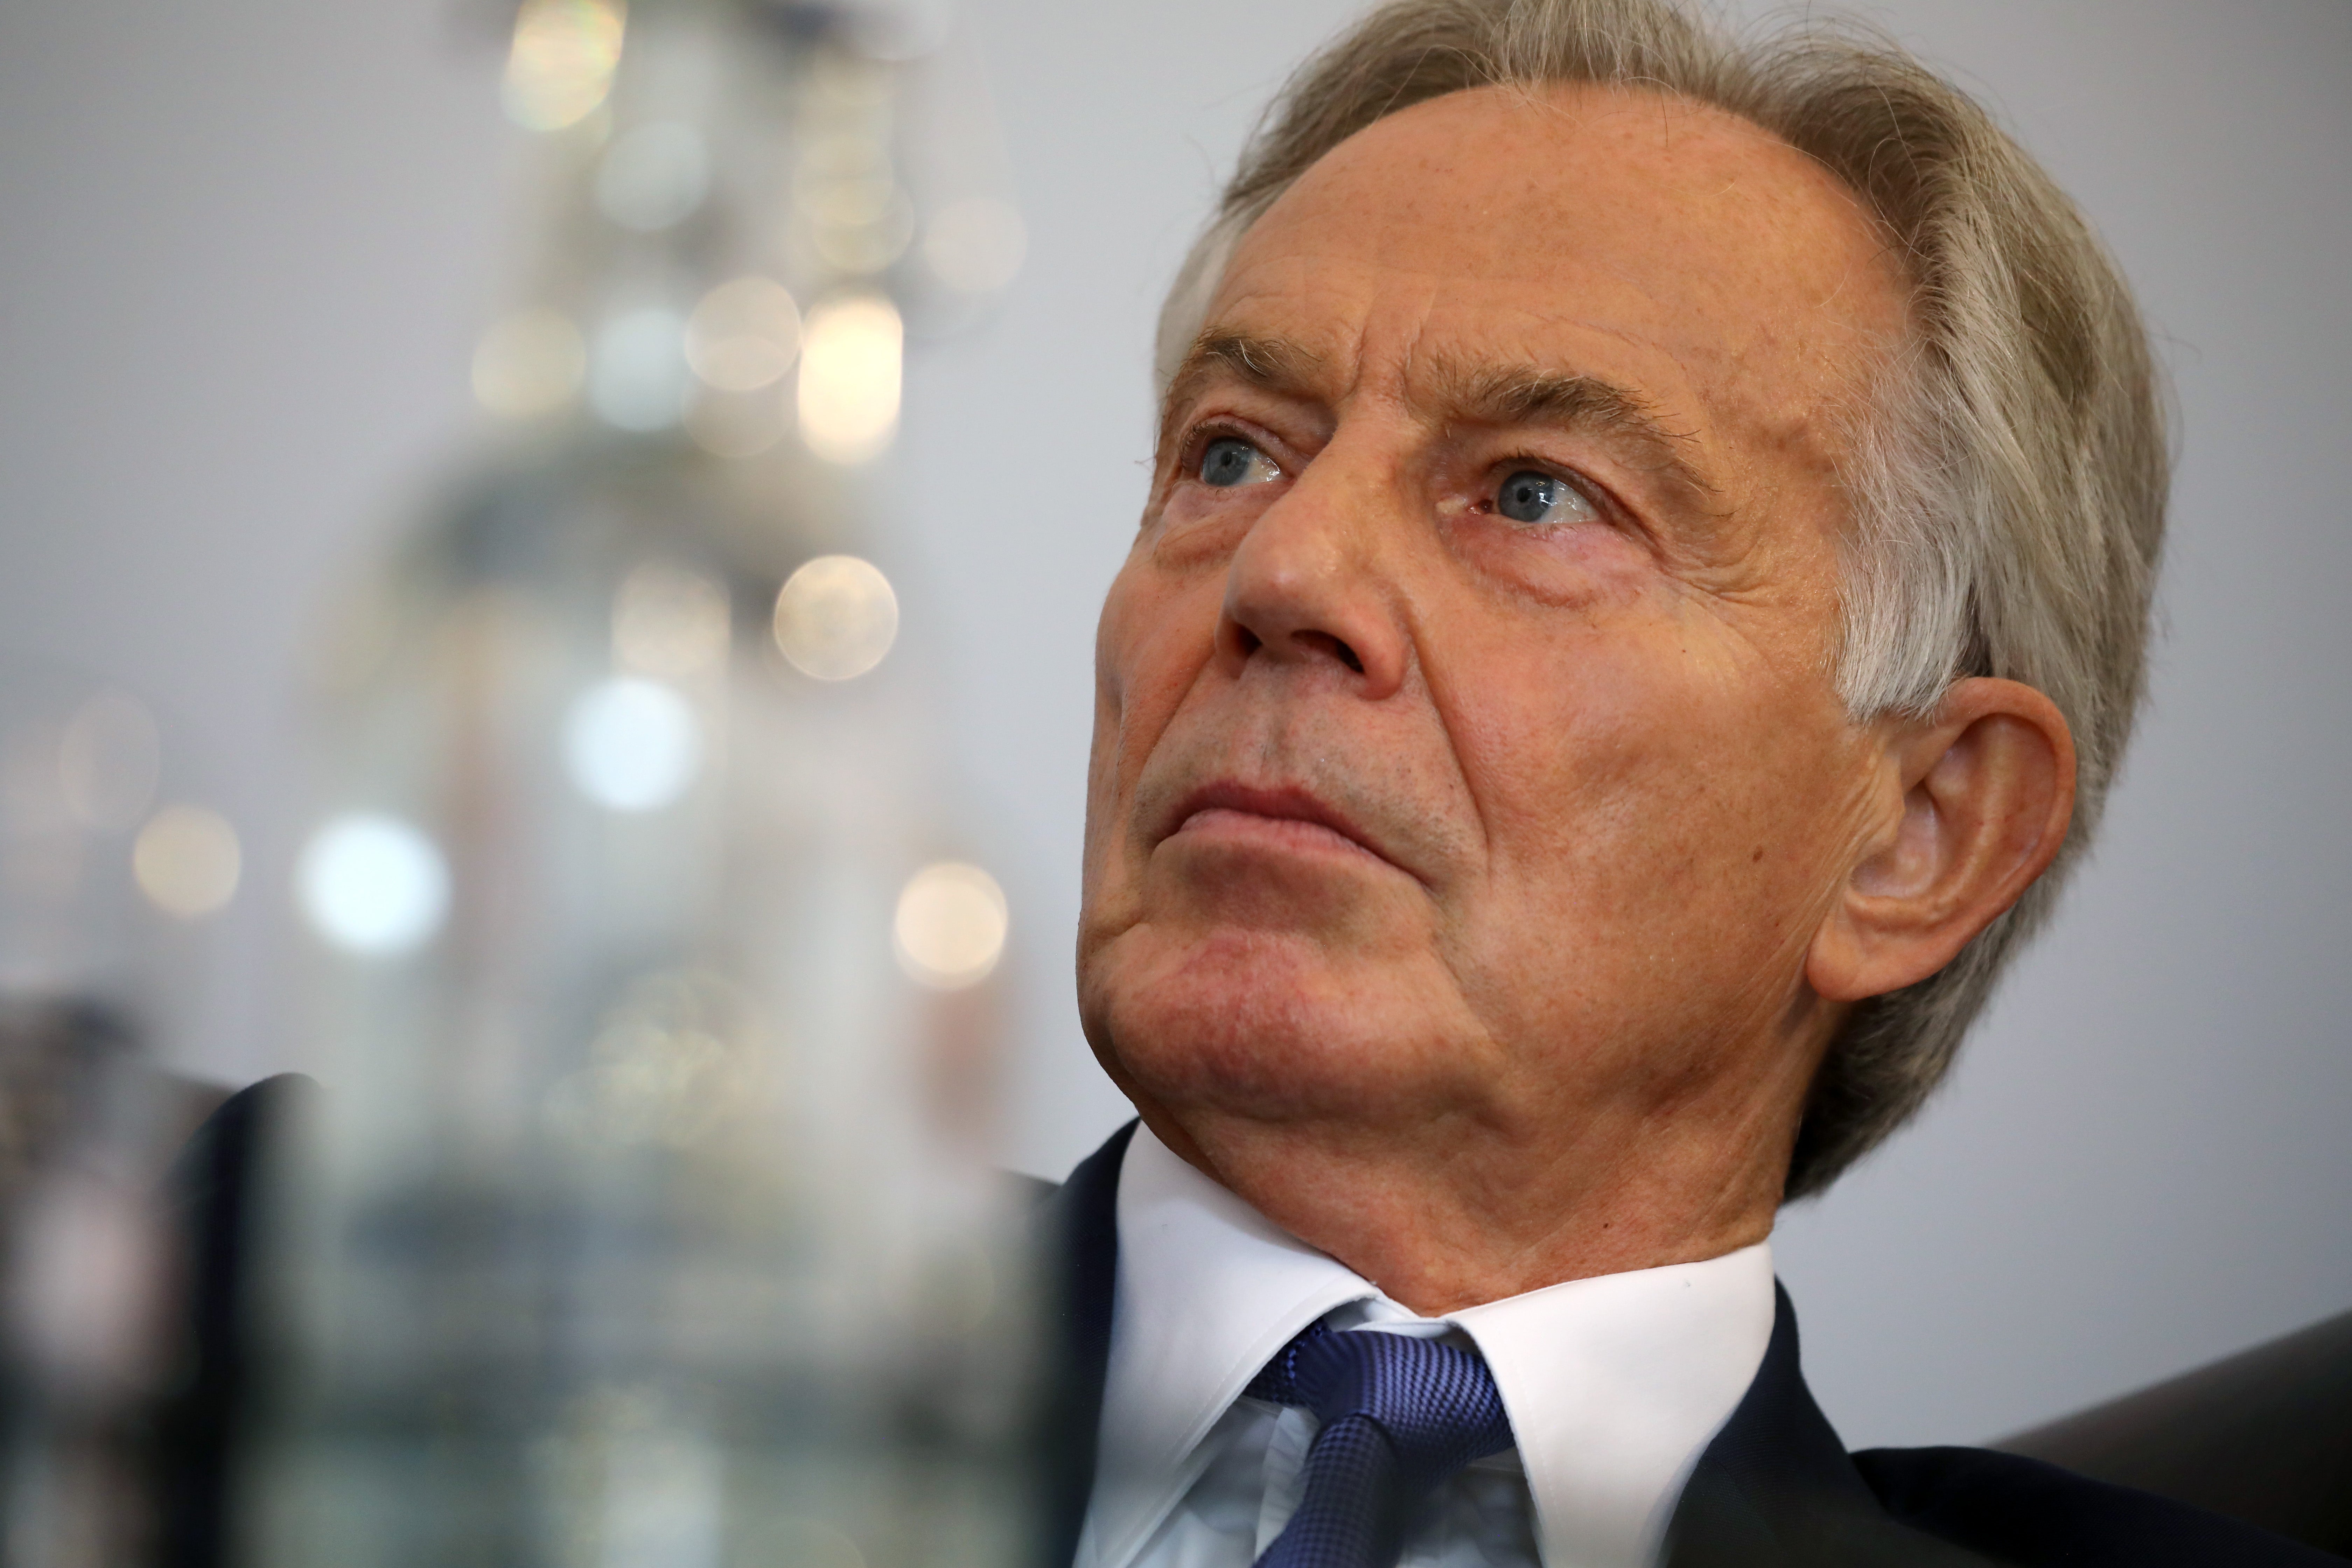 Tony Blair says Labour’s relative failure lies in failing to unite the Liberal and socialist traditions